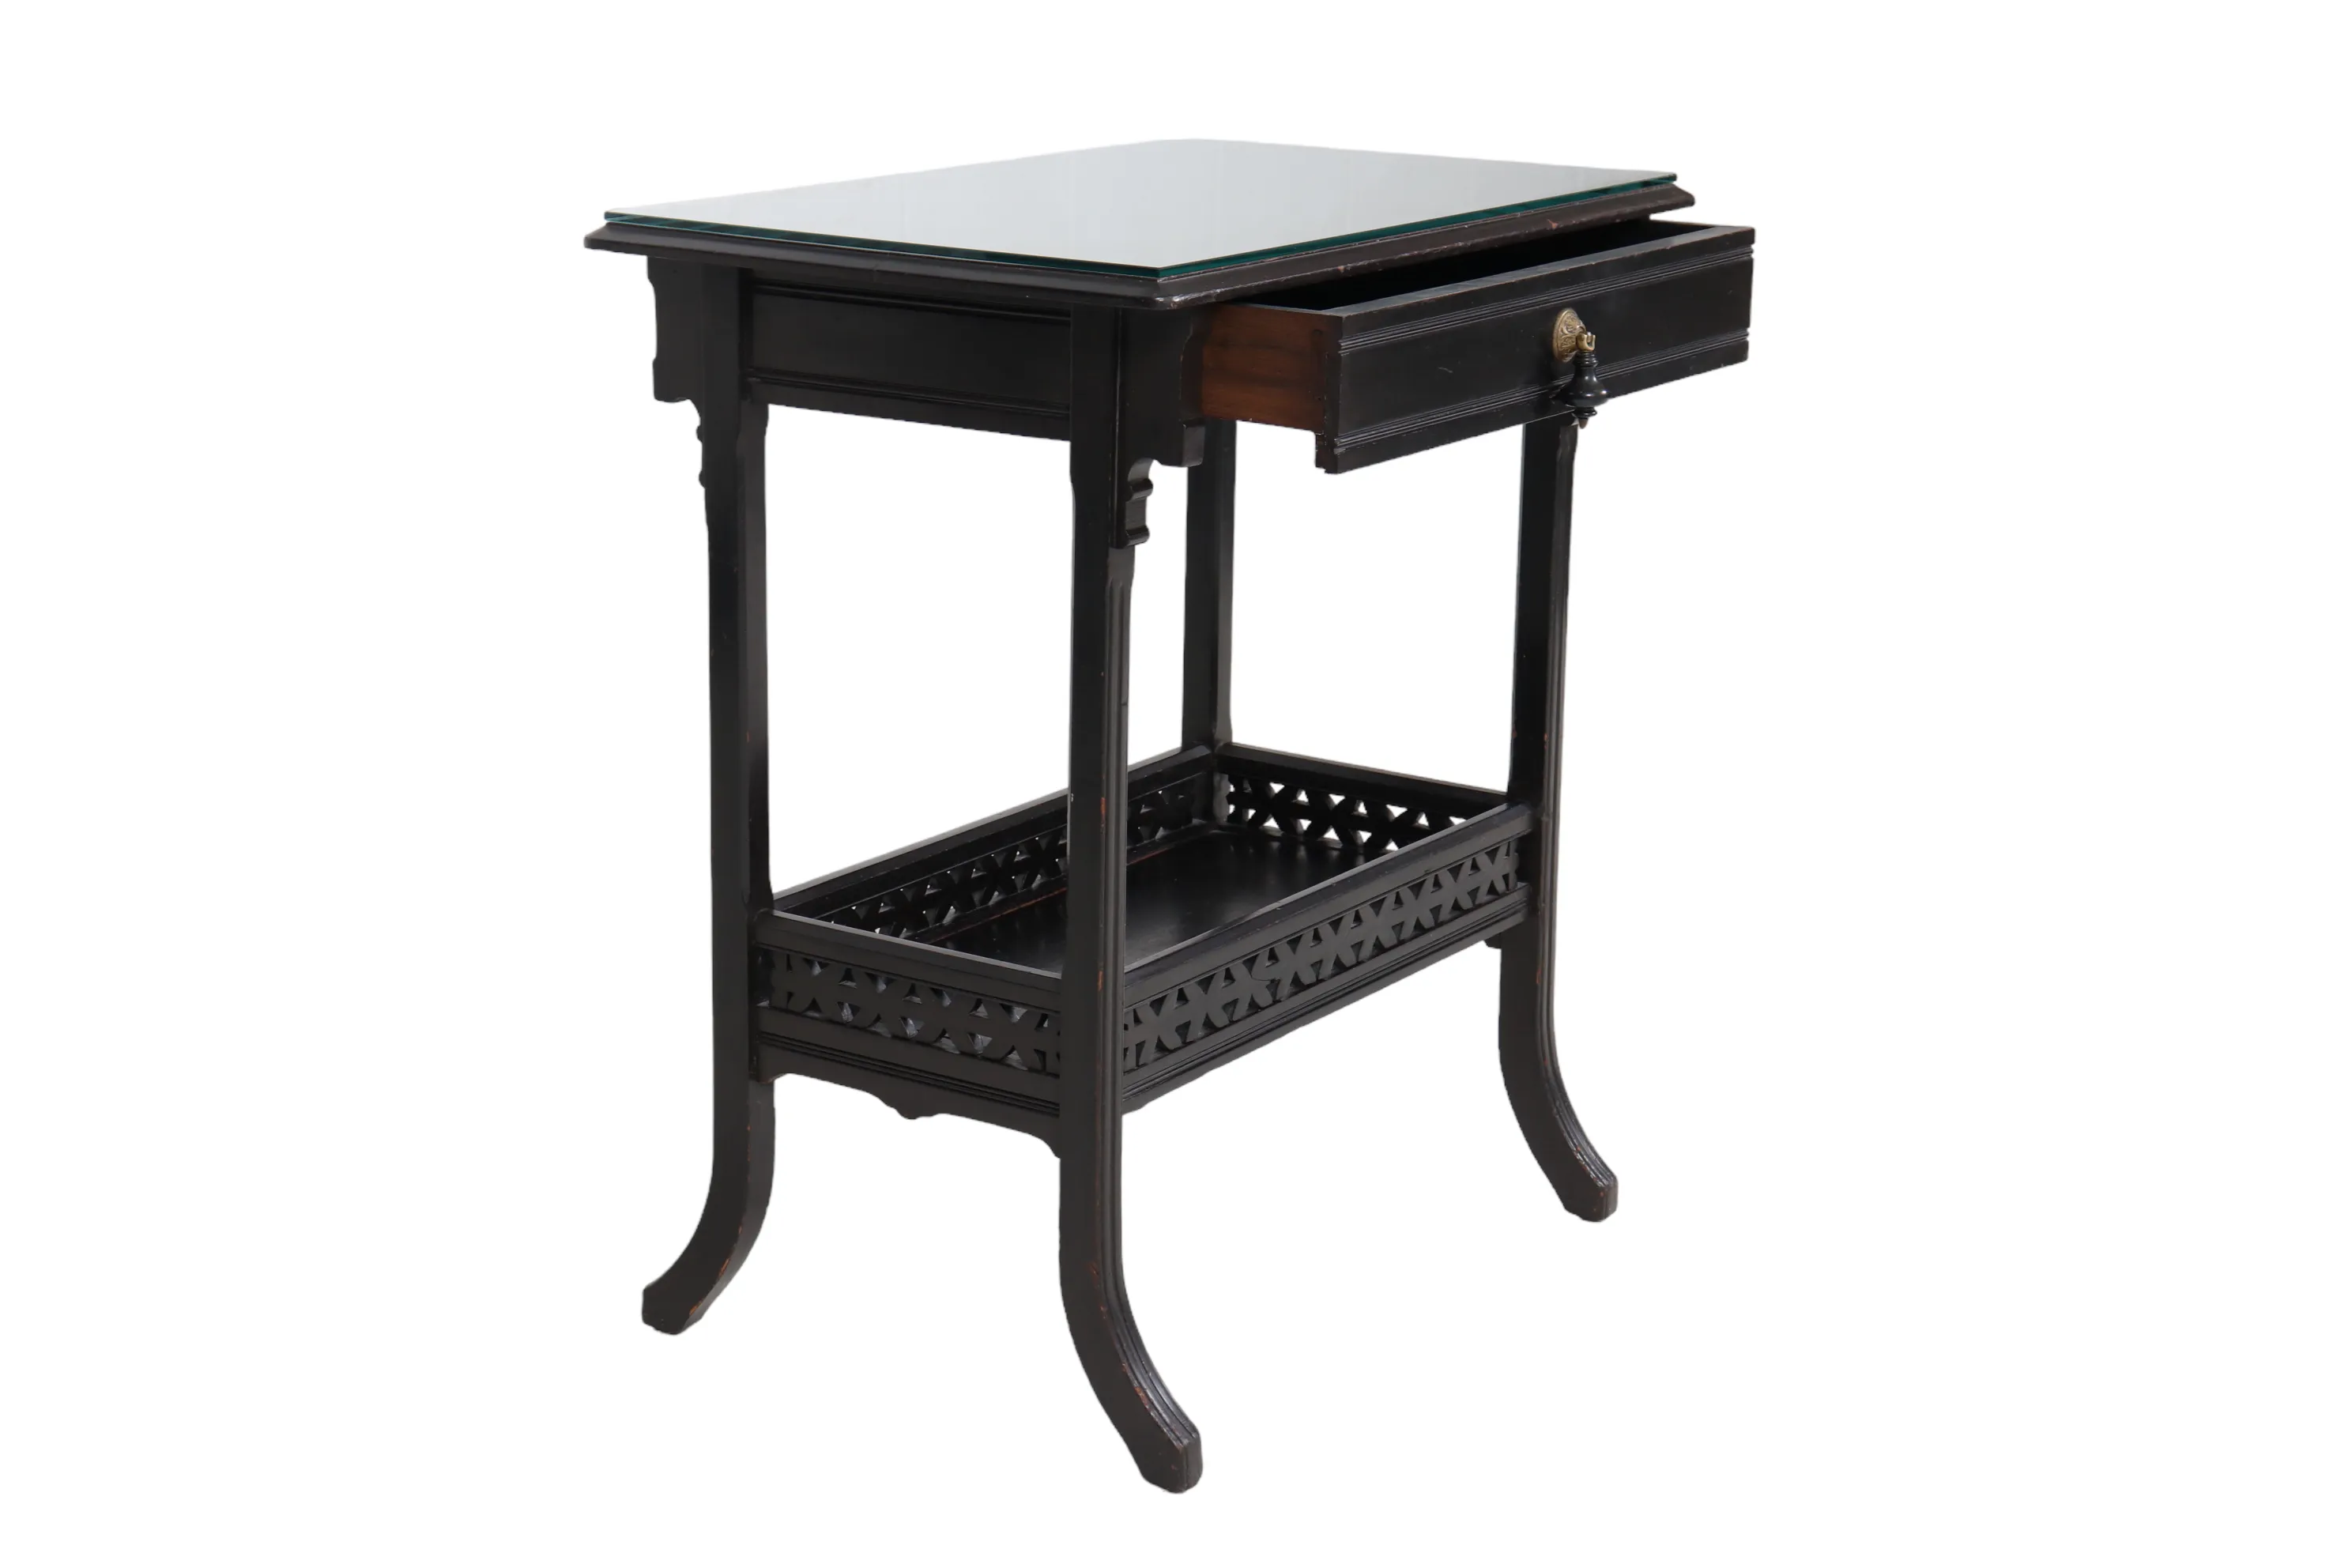 Chinoiserie Black Accent Table - Interesting Things - 26.25" L x 17" W x 29.25" H